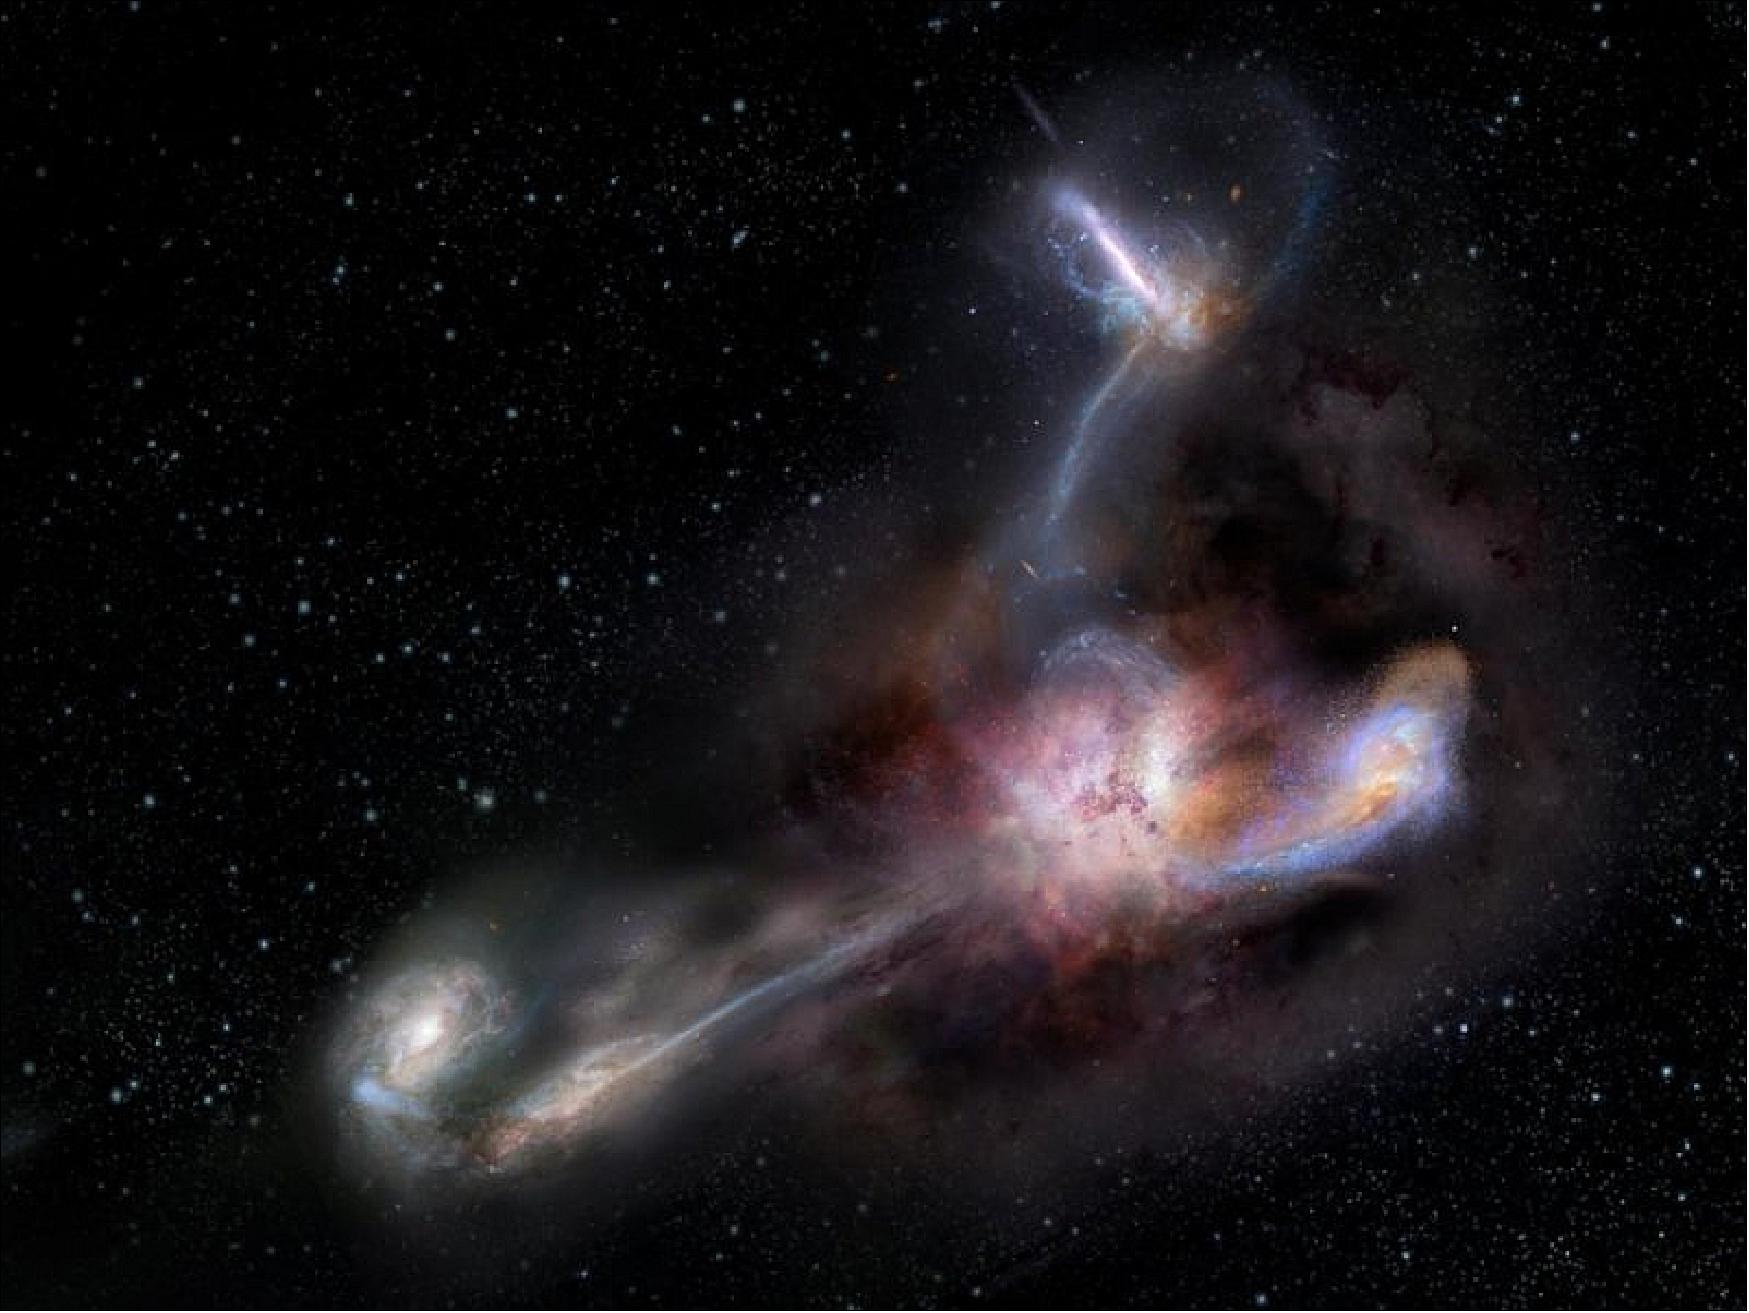 Figure 11: Artist impression of W2246-0526, the most luminous known galaxy, and three companion galaxies (image credit: NRAO/AUI/NSF, S. Dagnello)